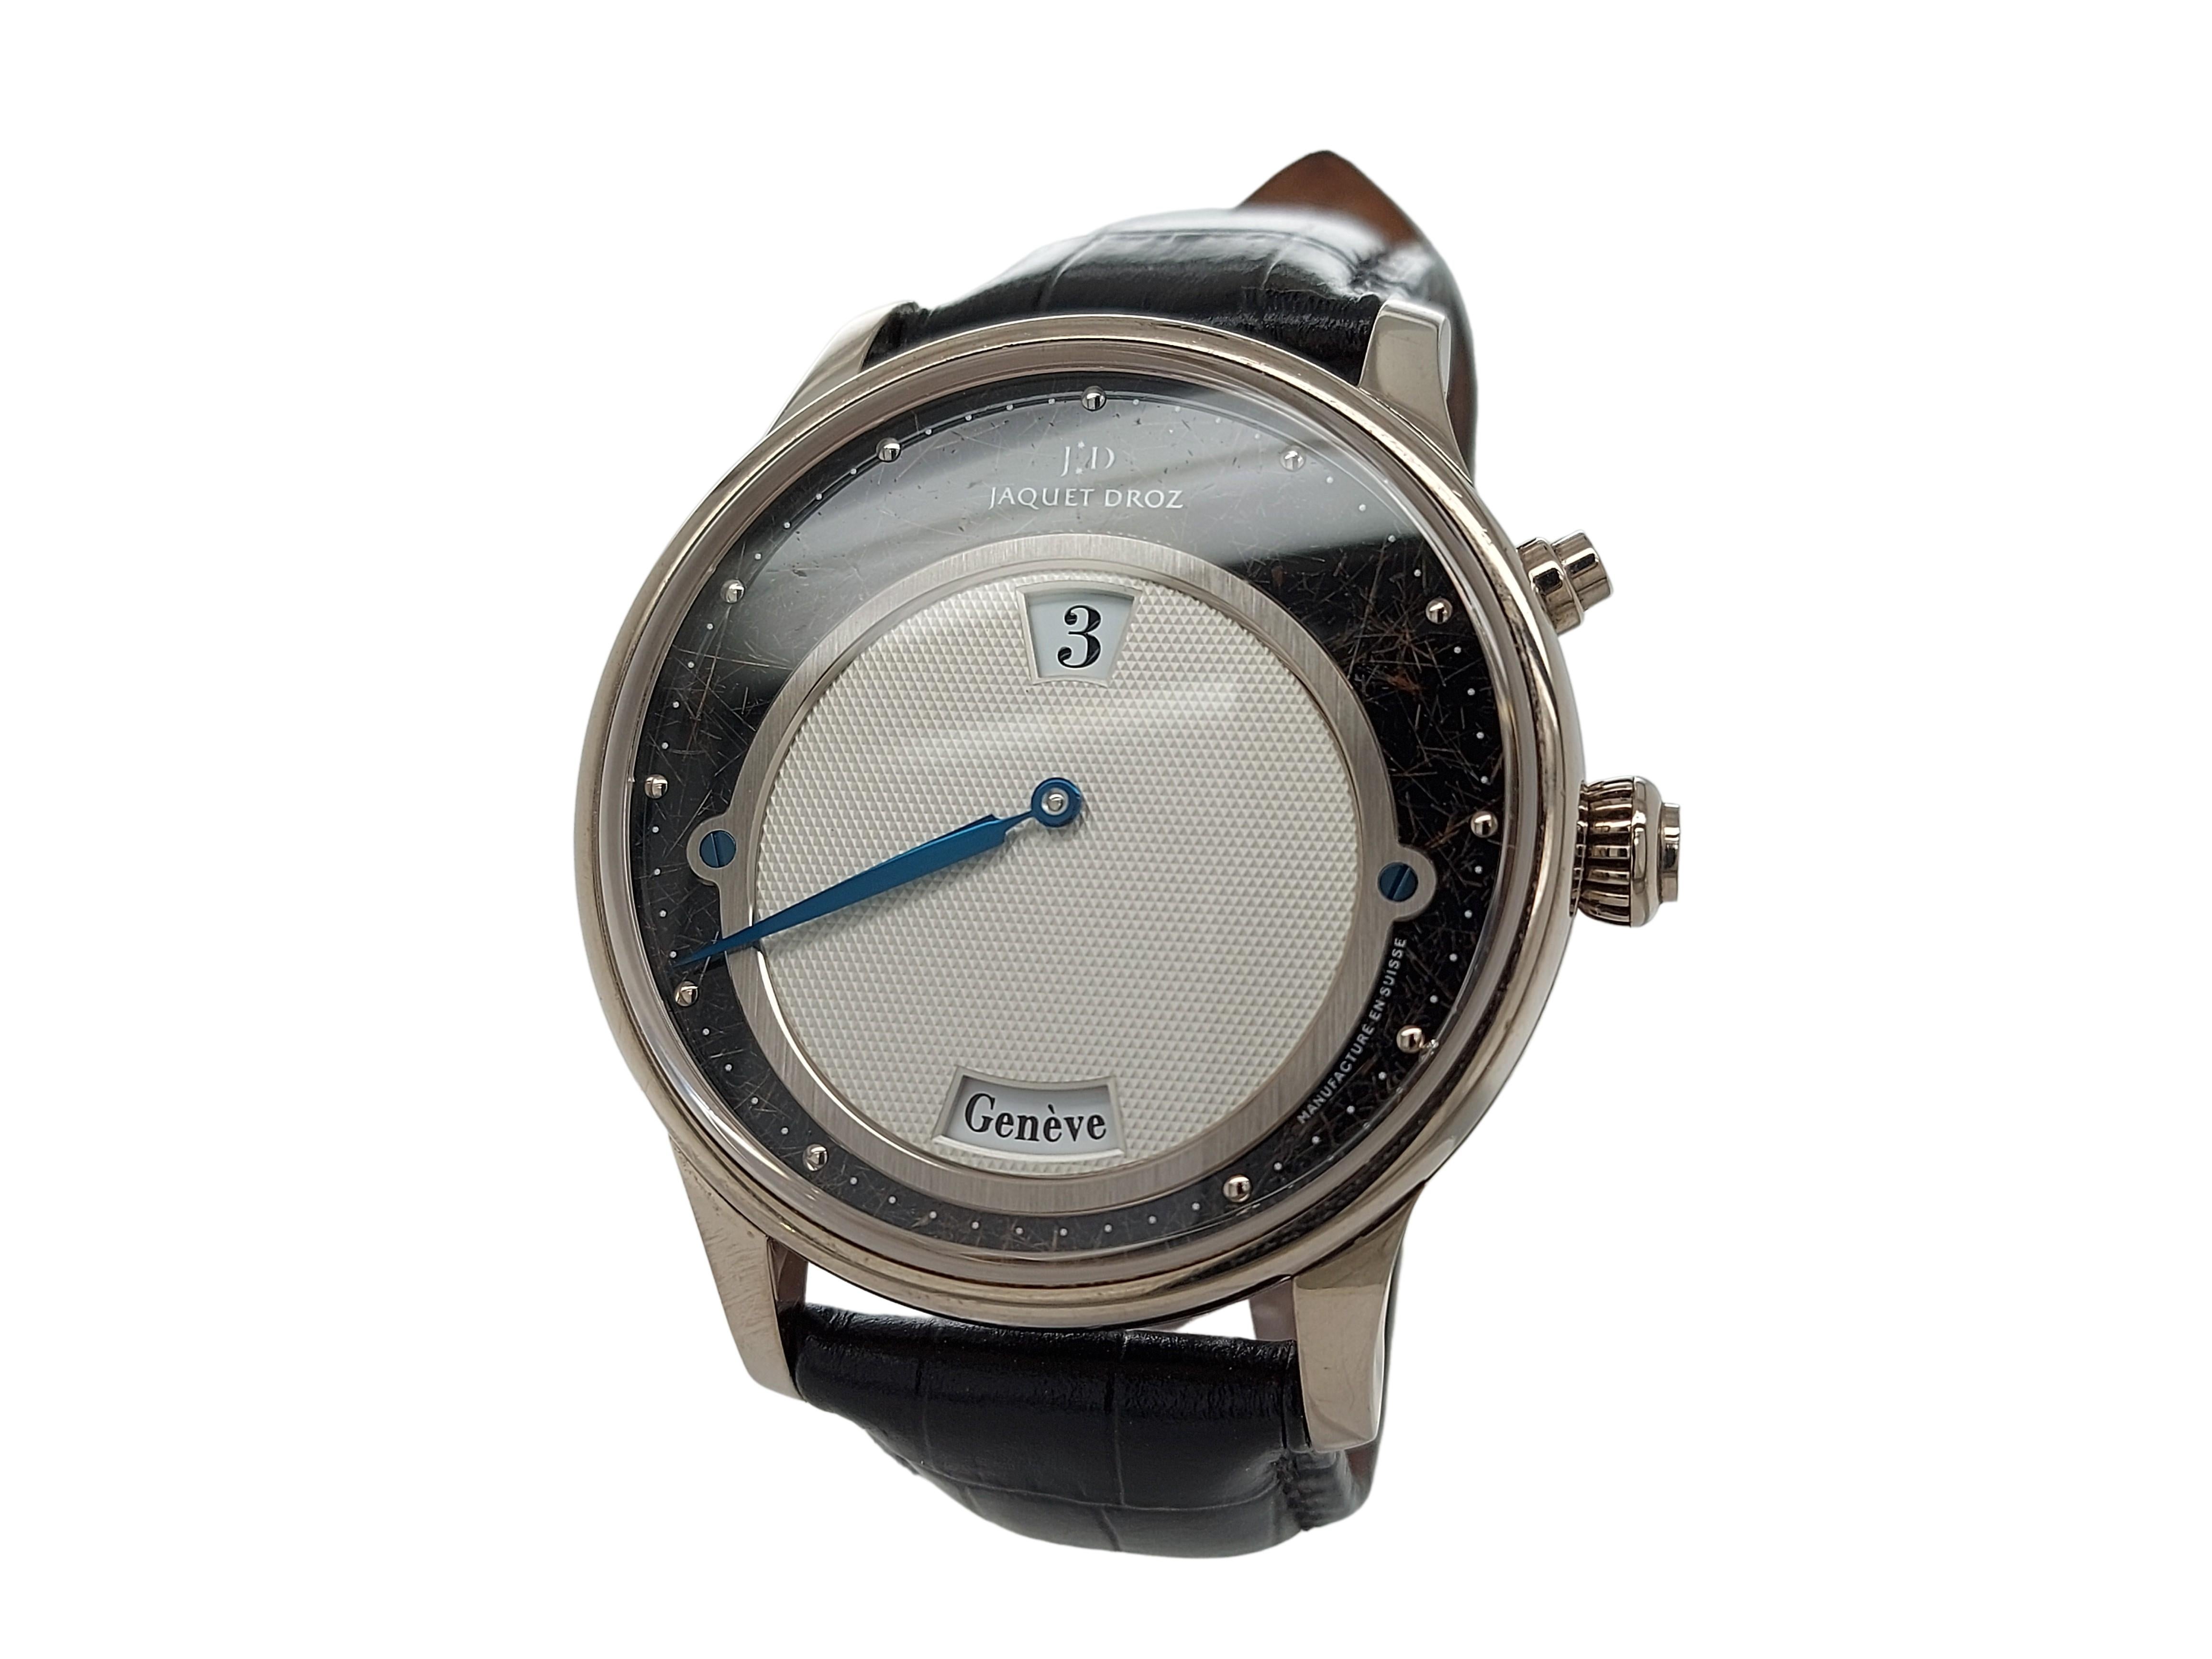 Artisan Jaquez Droz Twelve Cities Wrist Watch, 18kt White Gold, Limited to 8 Pieces ! For Sale